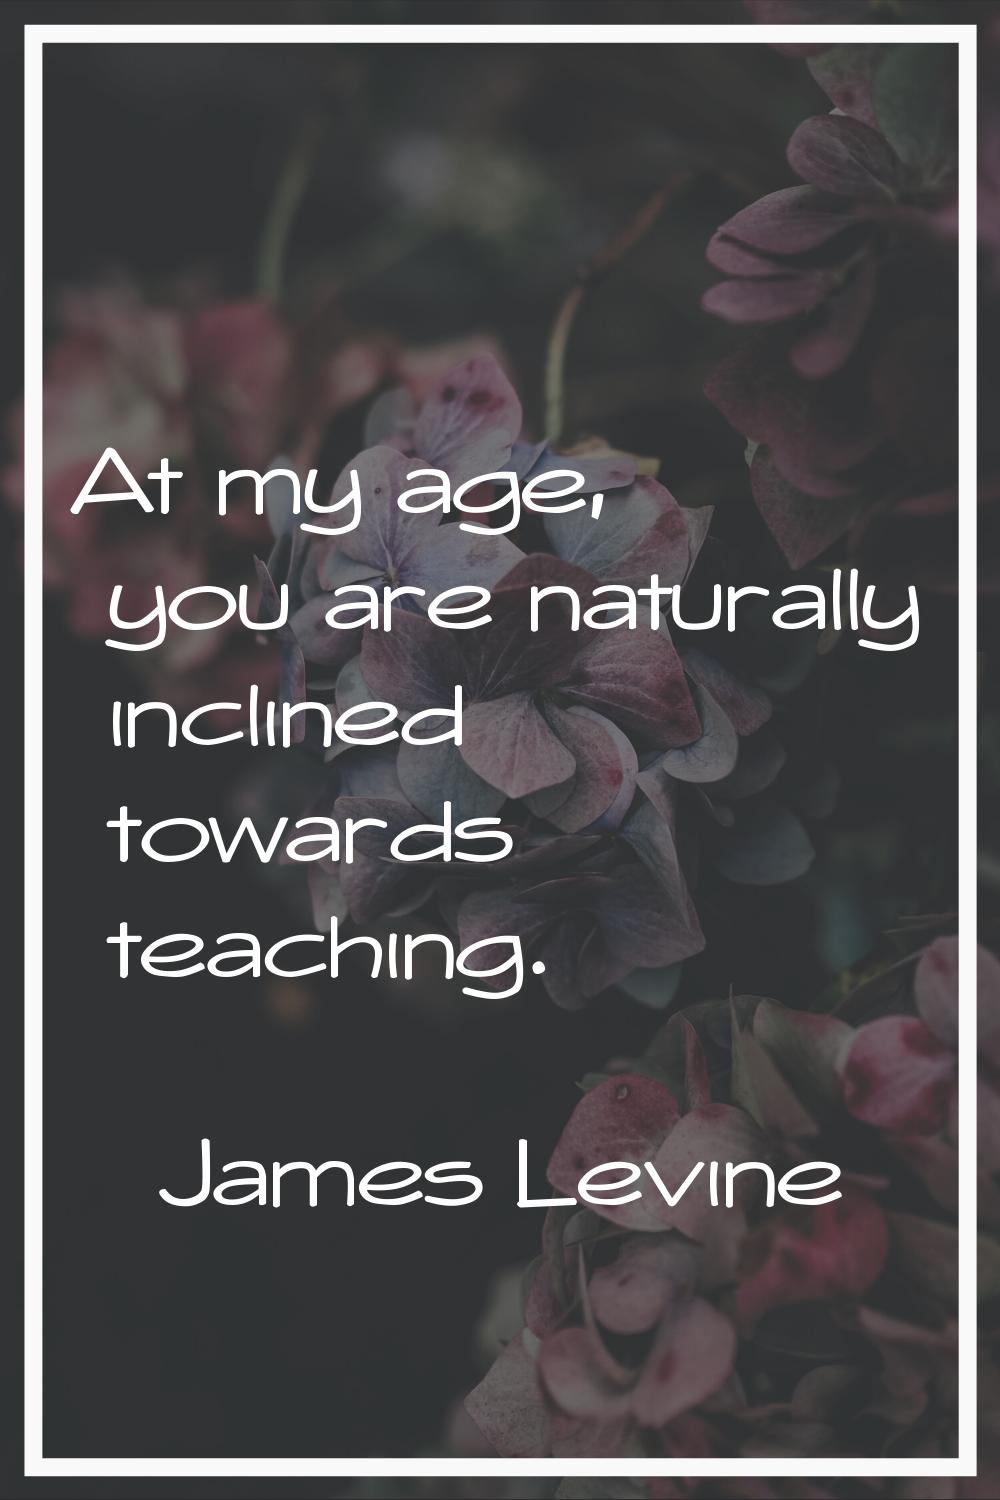 At my age, you are naturally inclined towards teaching.